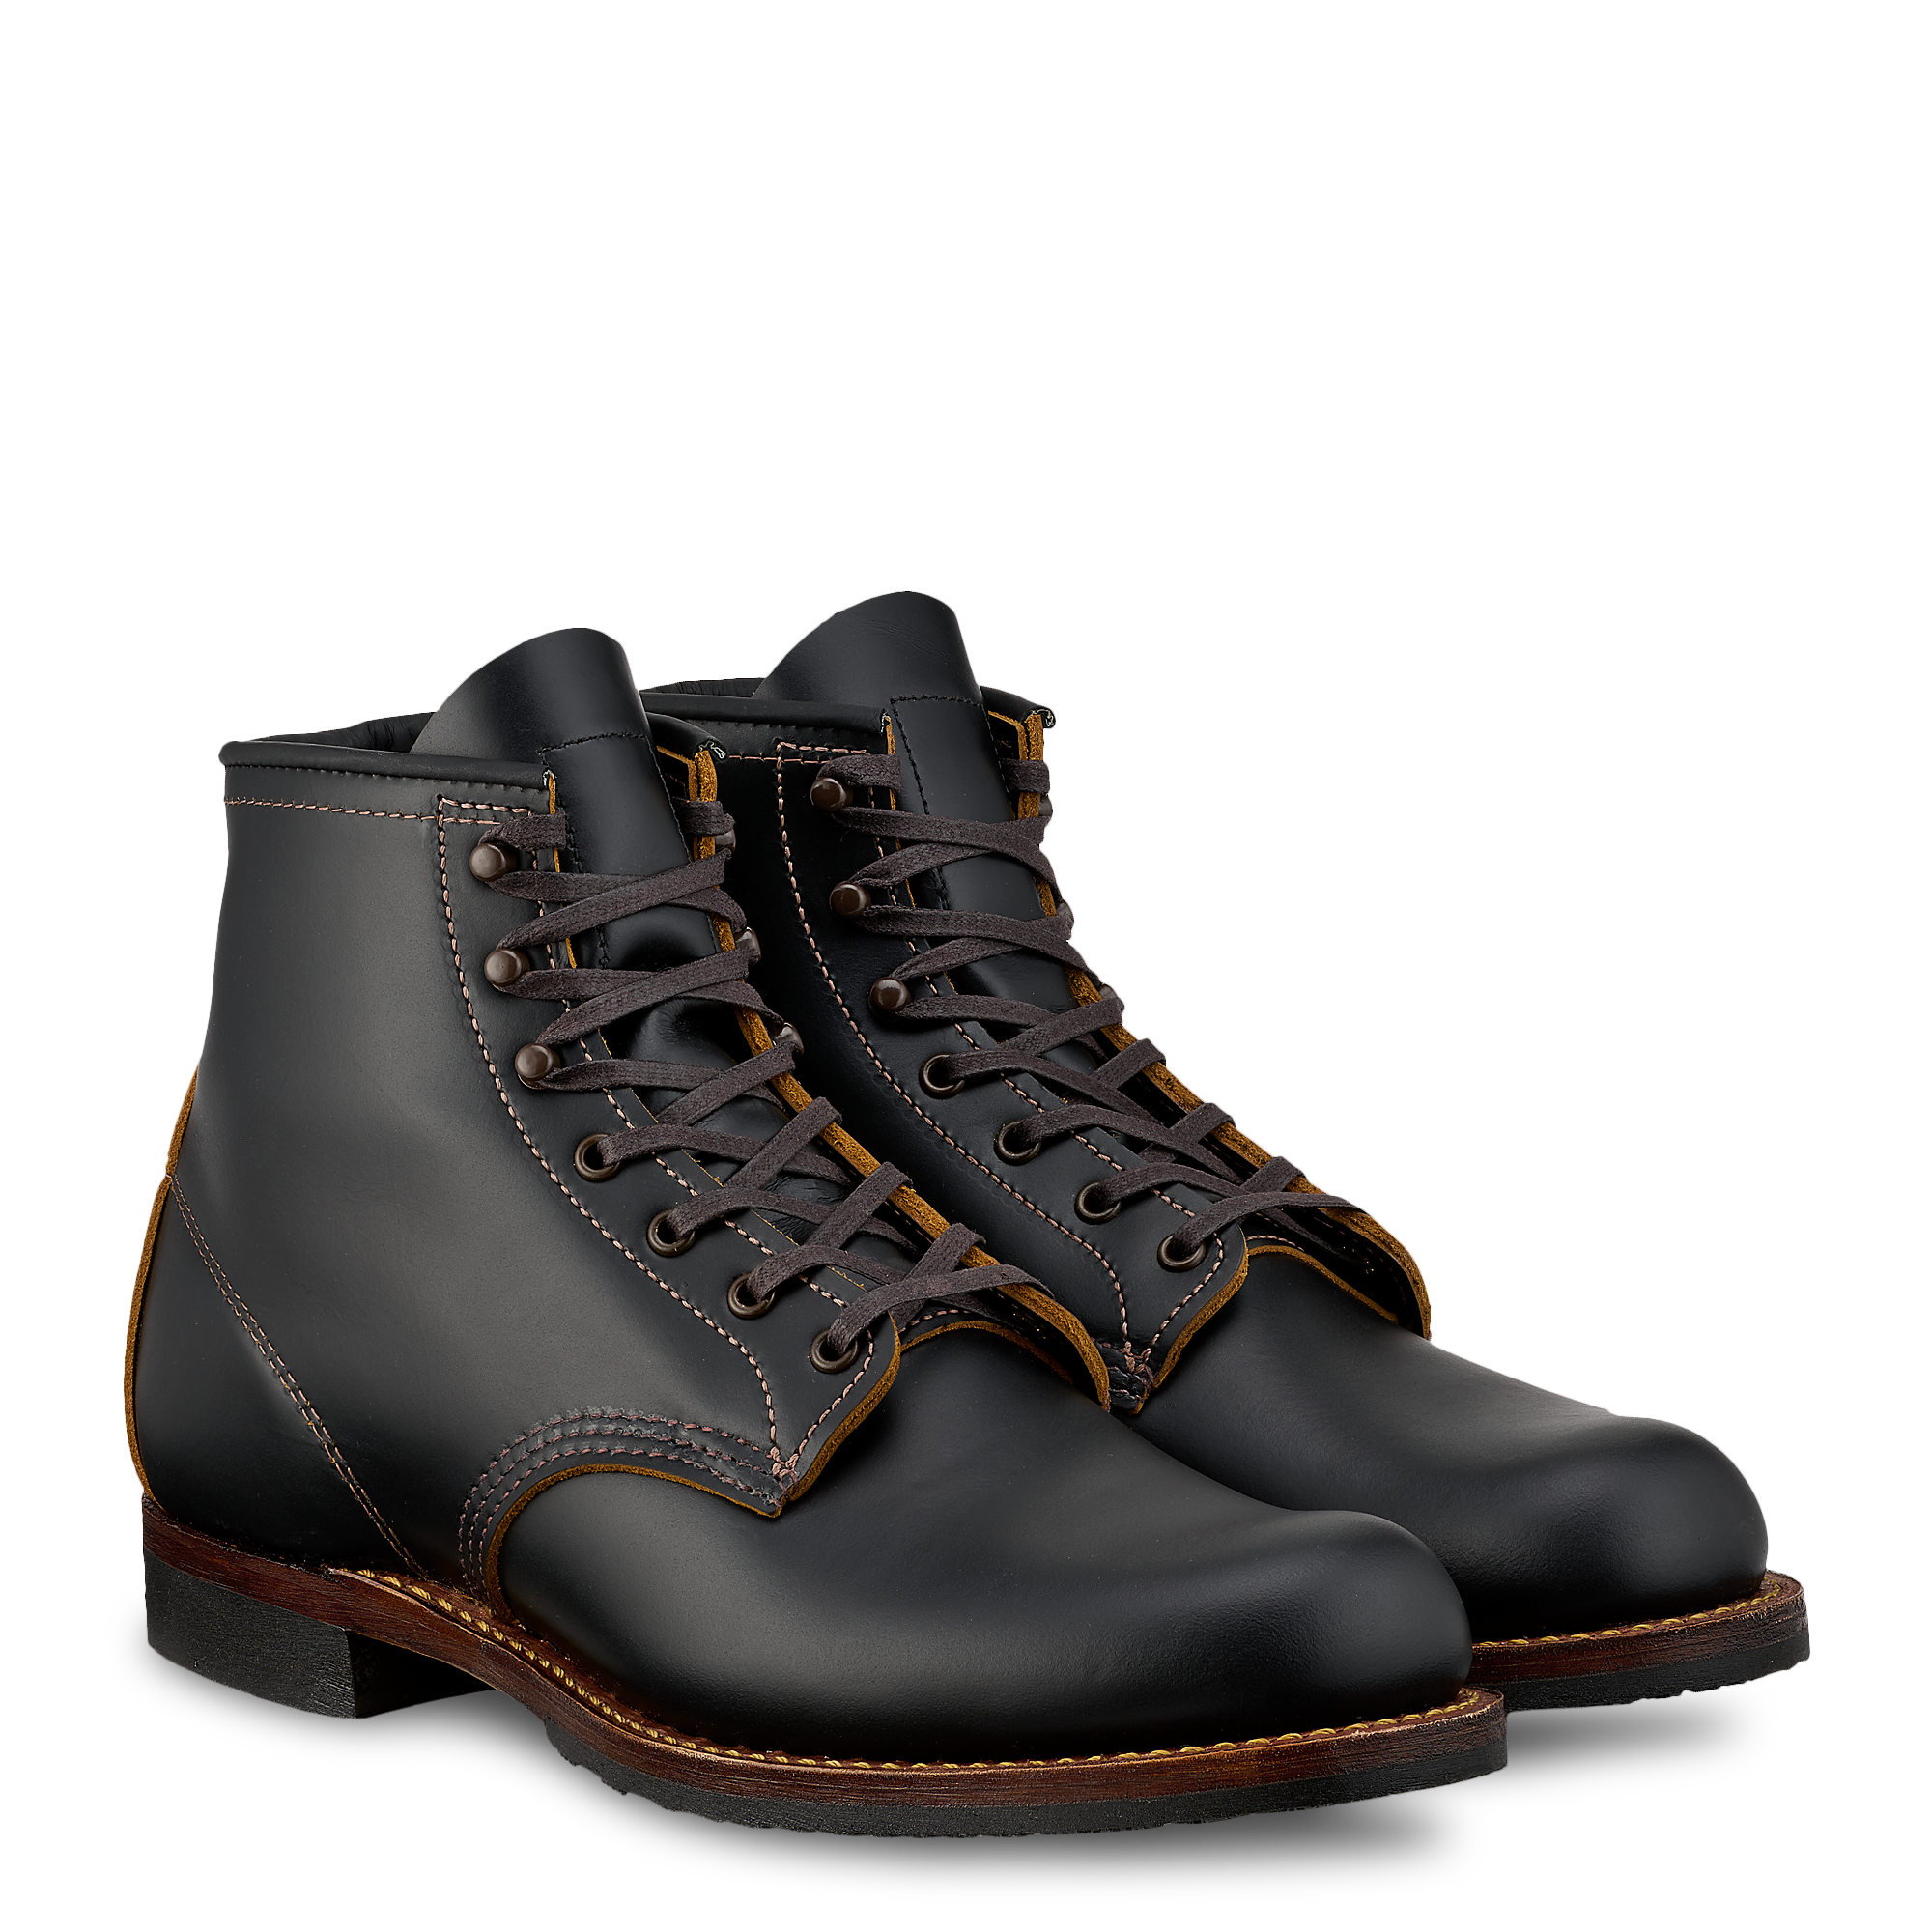 Beckman Boots 9060 - Red Wing London